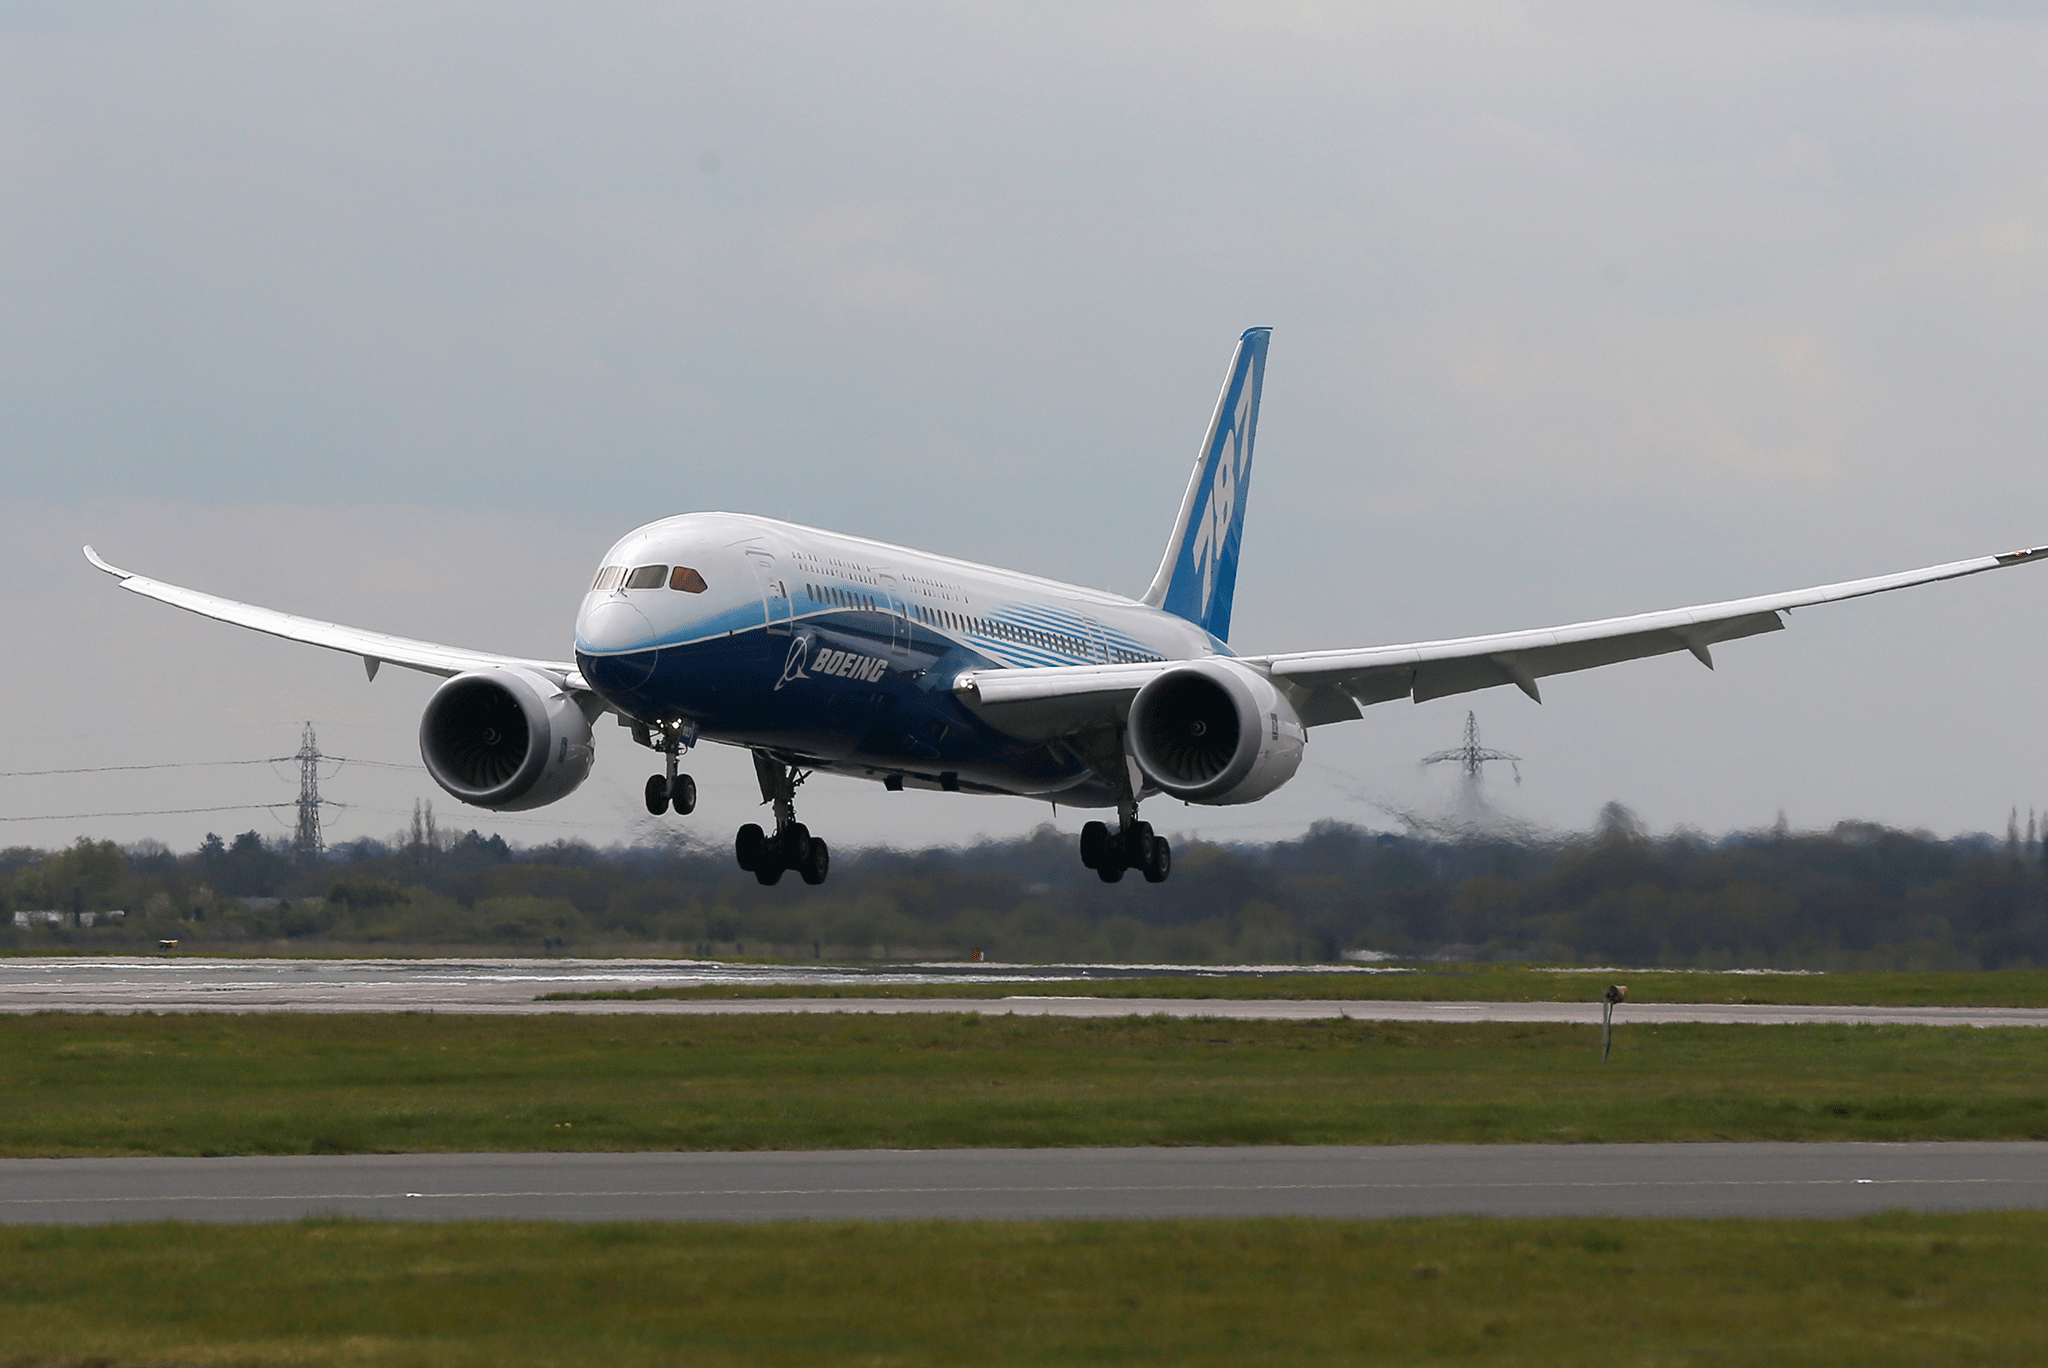 Flights have been cancelled after problems with Rolls Royce engines in Boeing's 787 Dreamliner